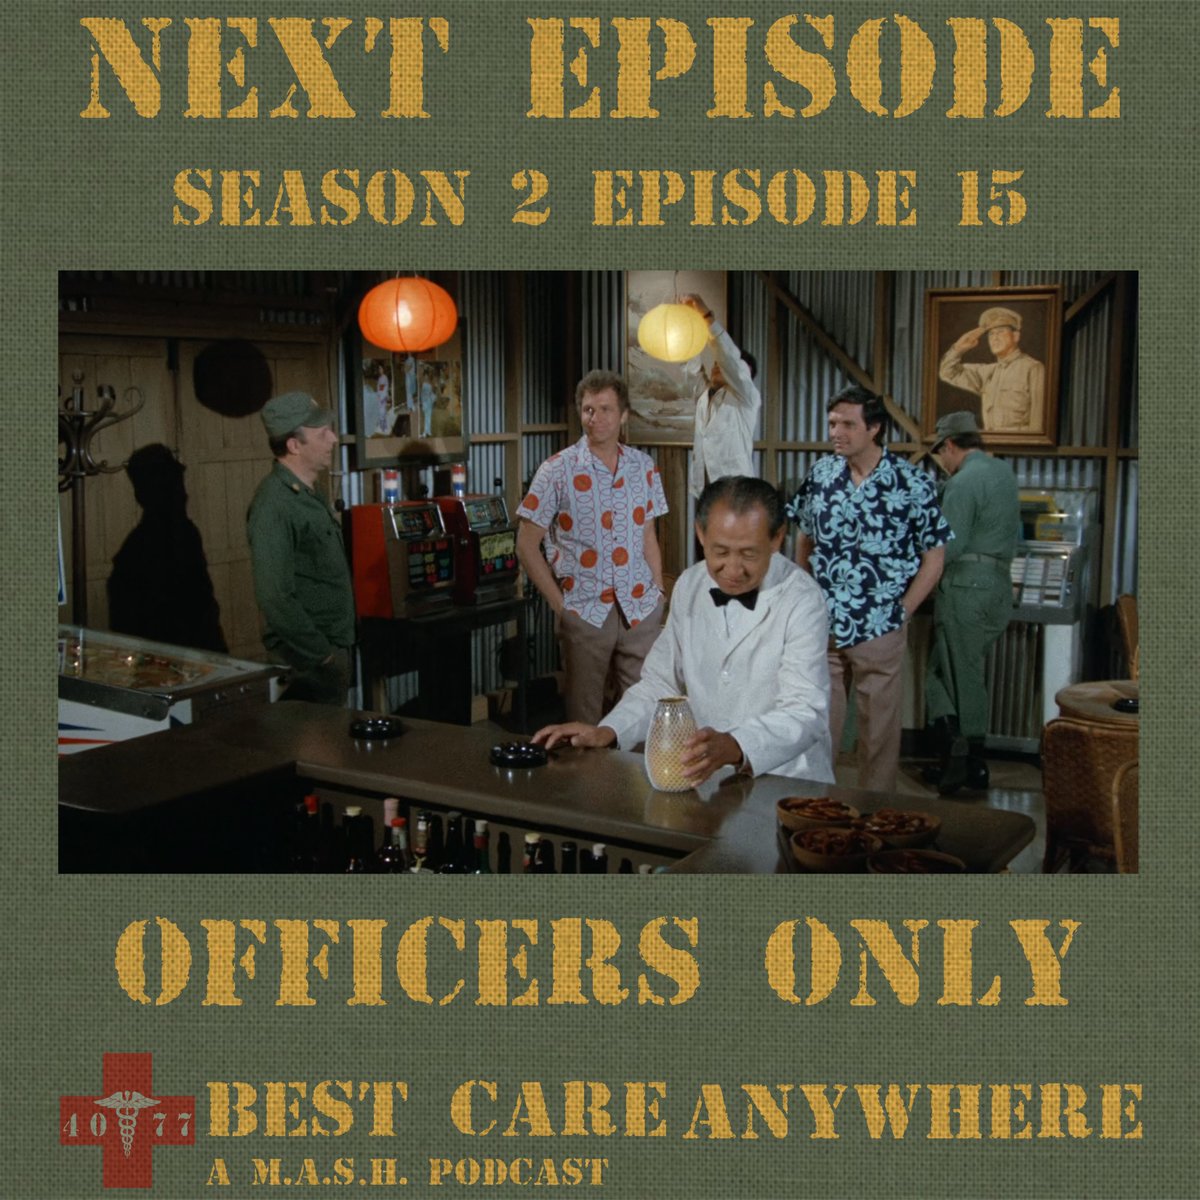 NEXT RPISODE: 'OFFICERS ONLY' S2 E15

The 4077th saves a generals son so naturally, they get a full bar and lounge as a reward! A silly little episode with some good comedy. What are your thoughts? Leve us your ratings below!
#OfficersOnly #MASH4077 #BestCareAnywhere